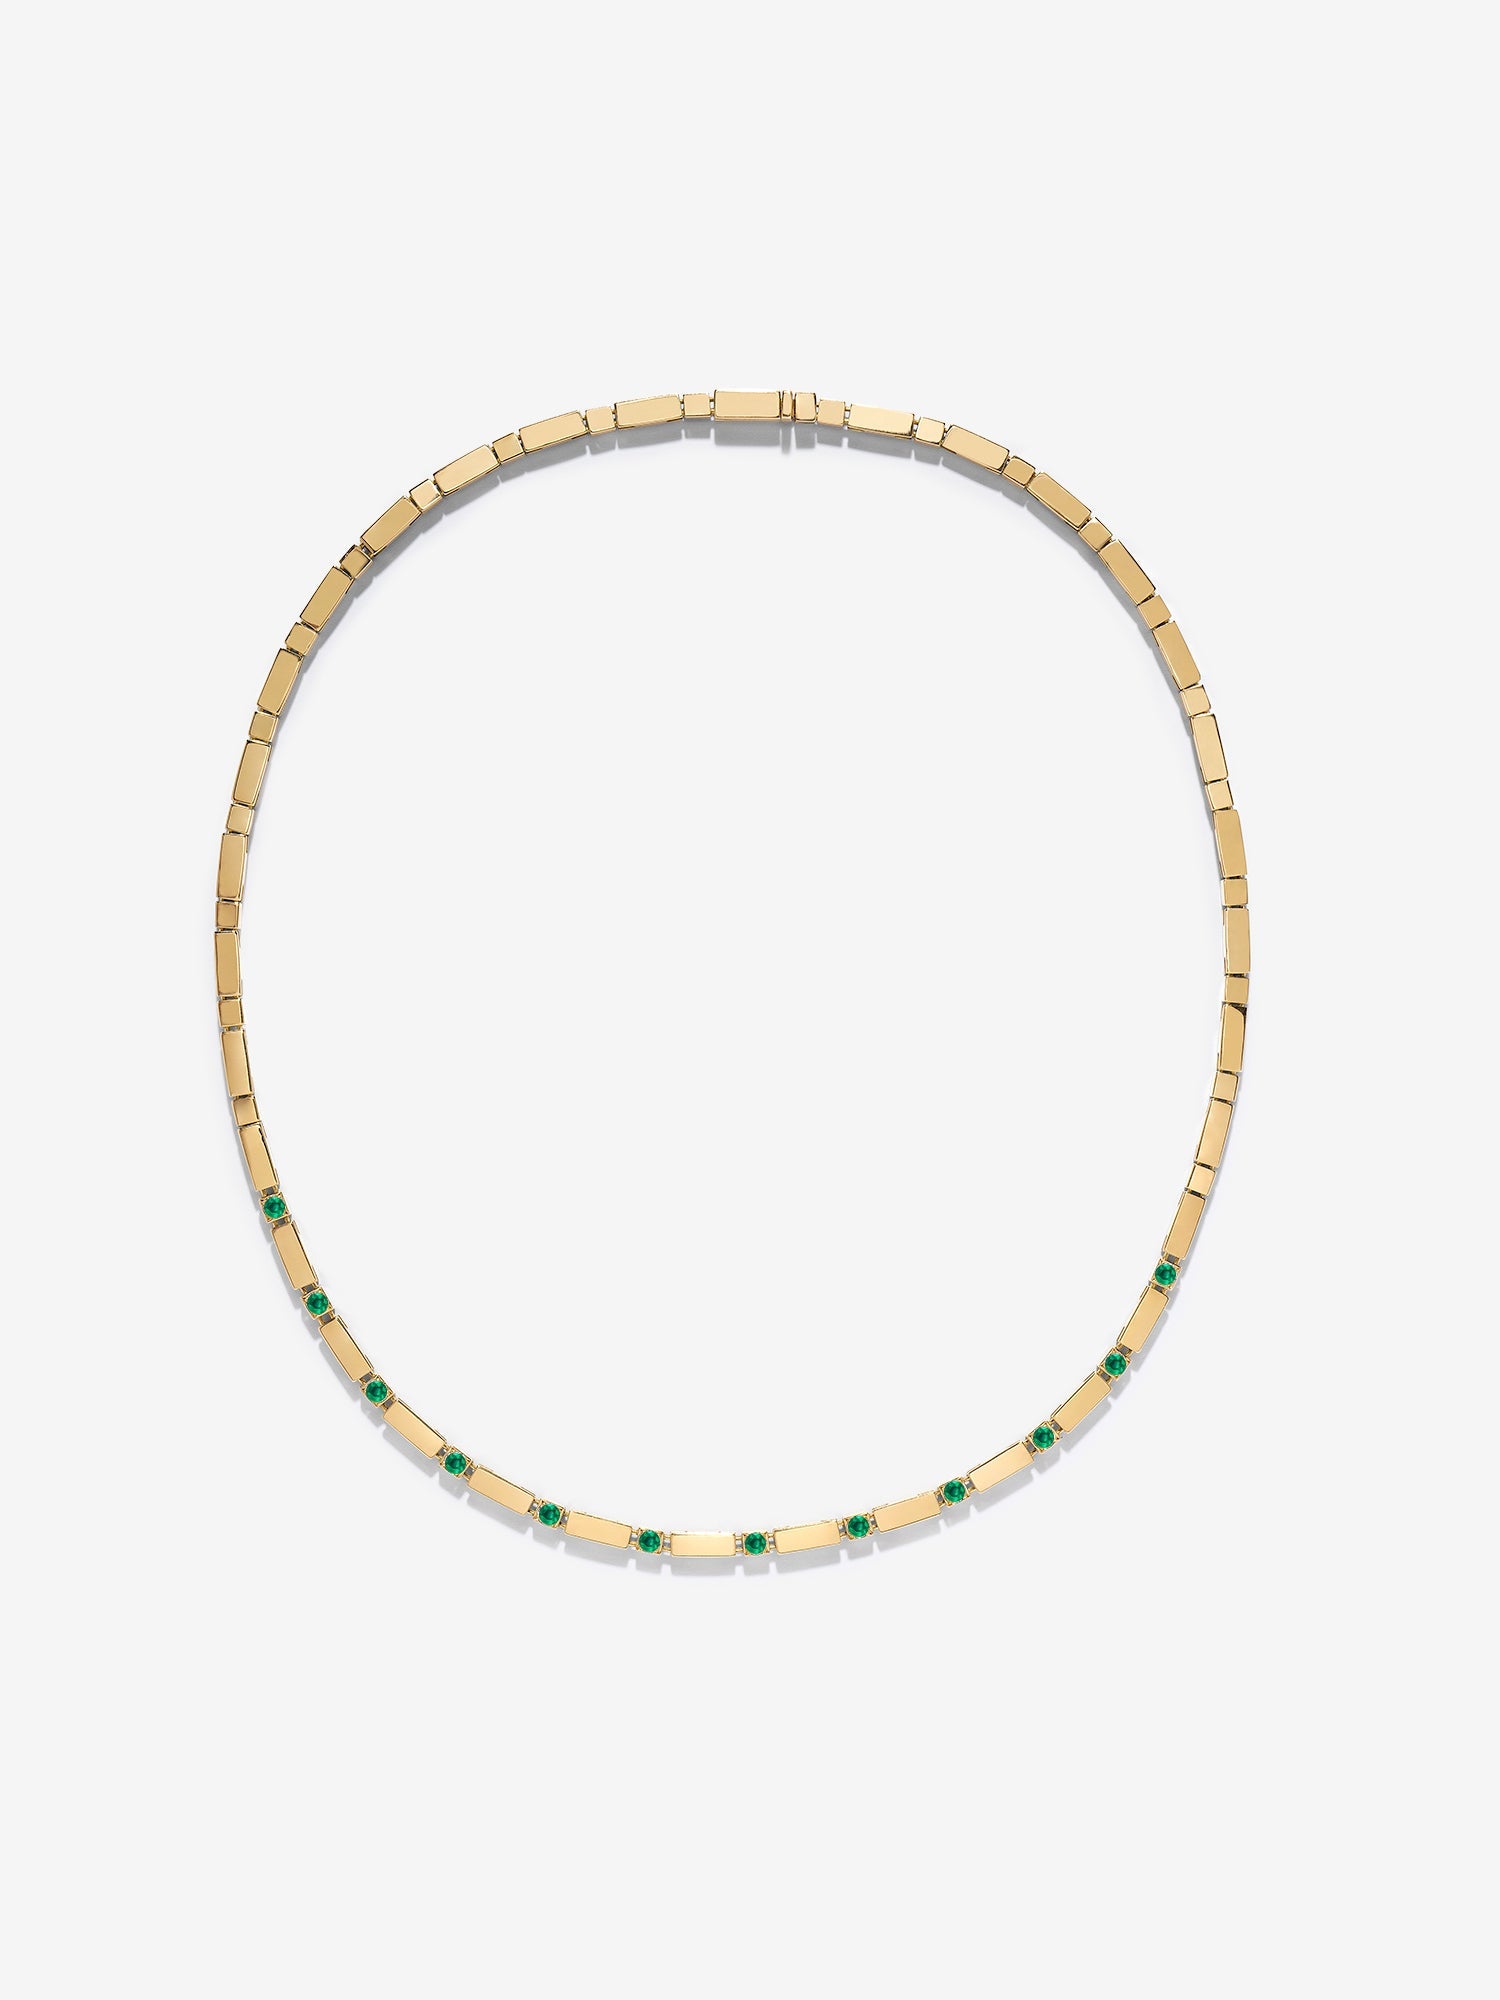 Gold Bar and Emerald Tennis Necklace